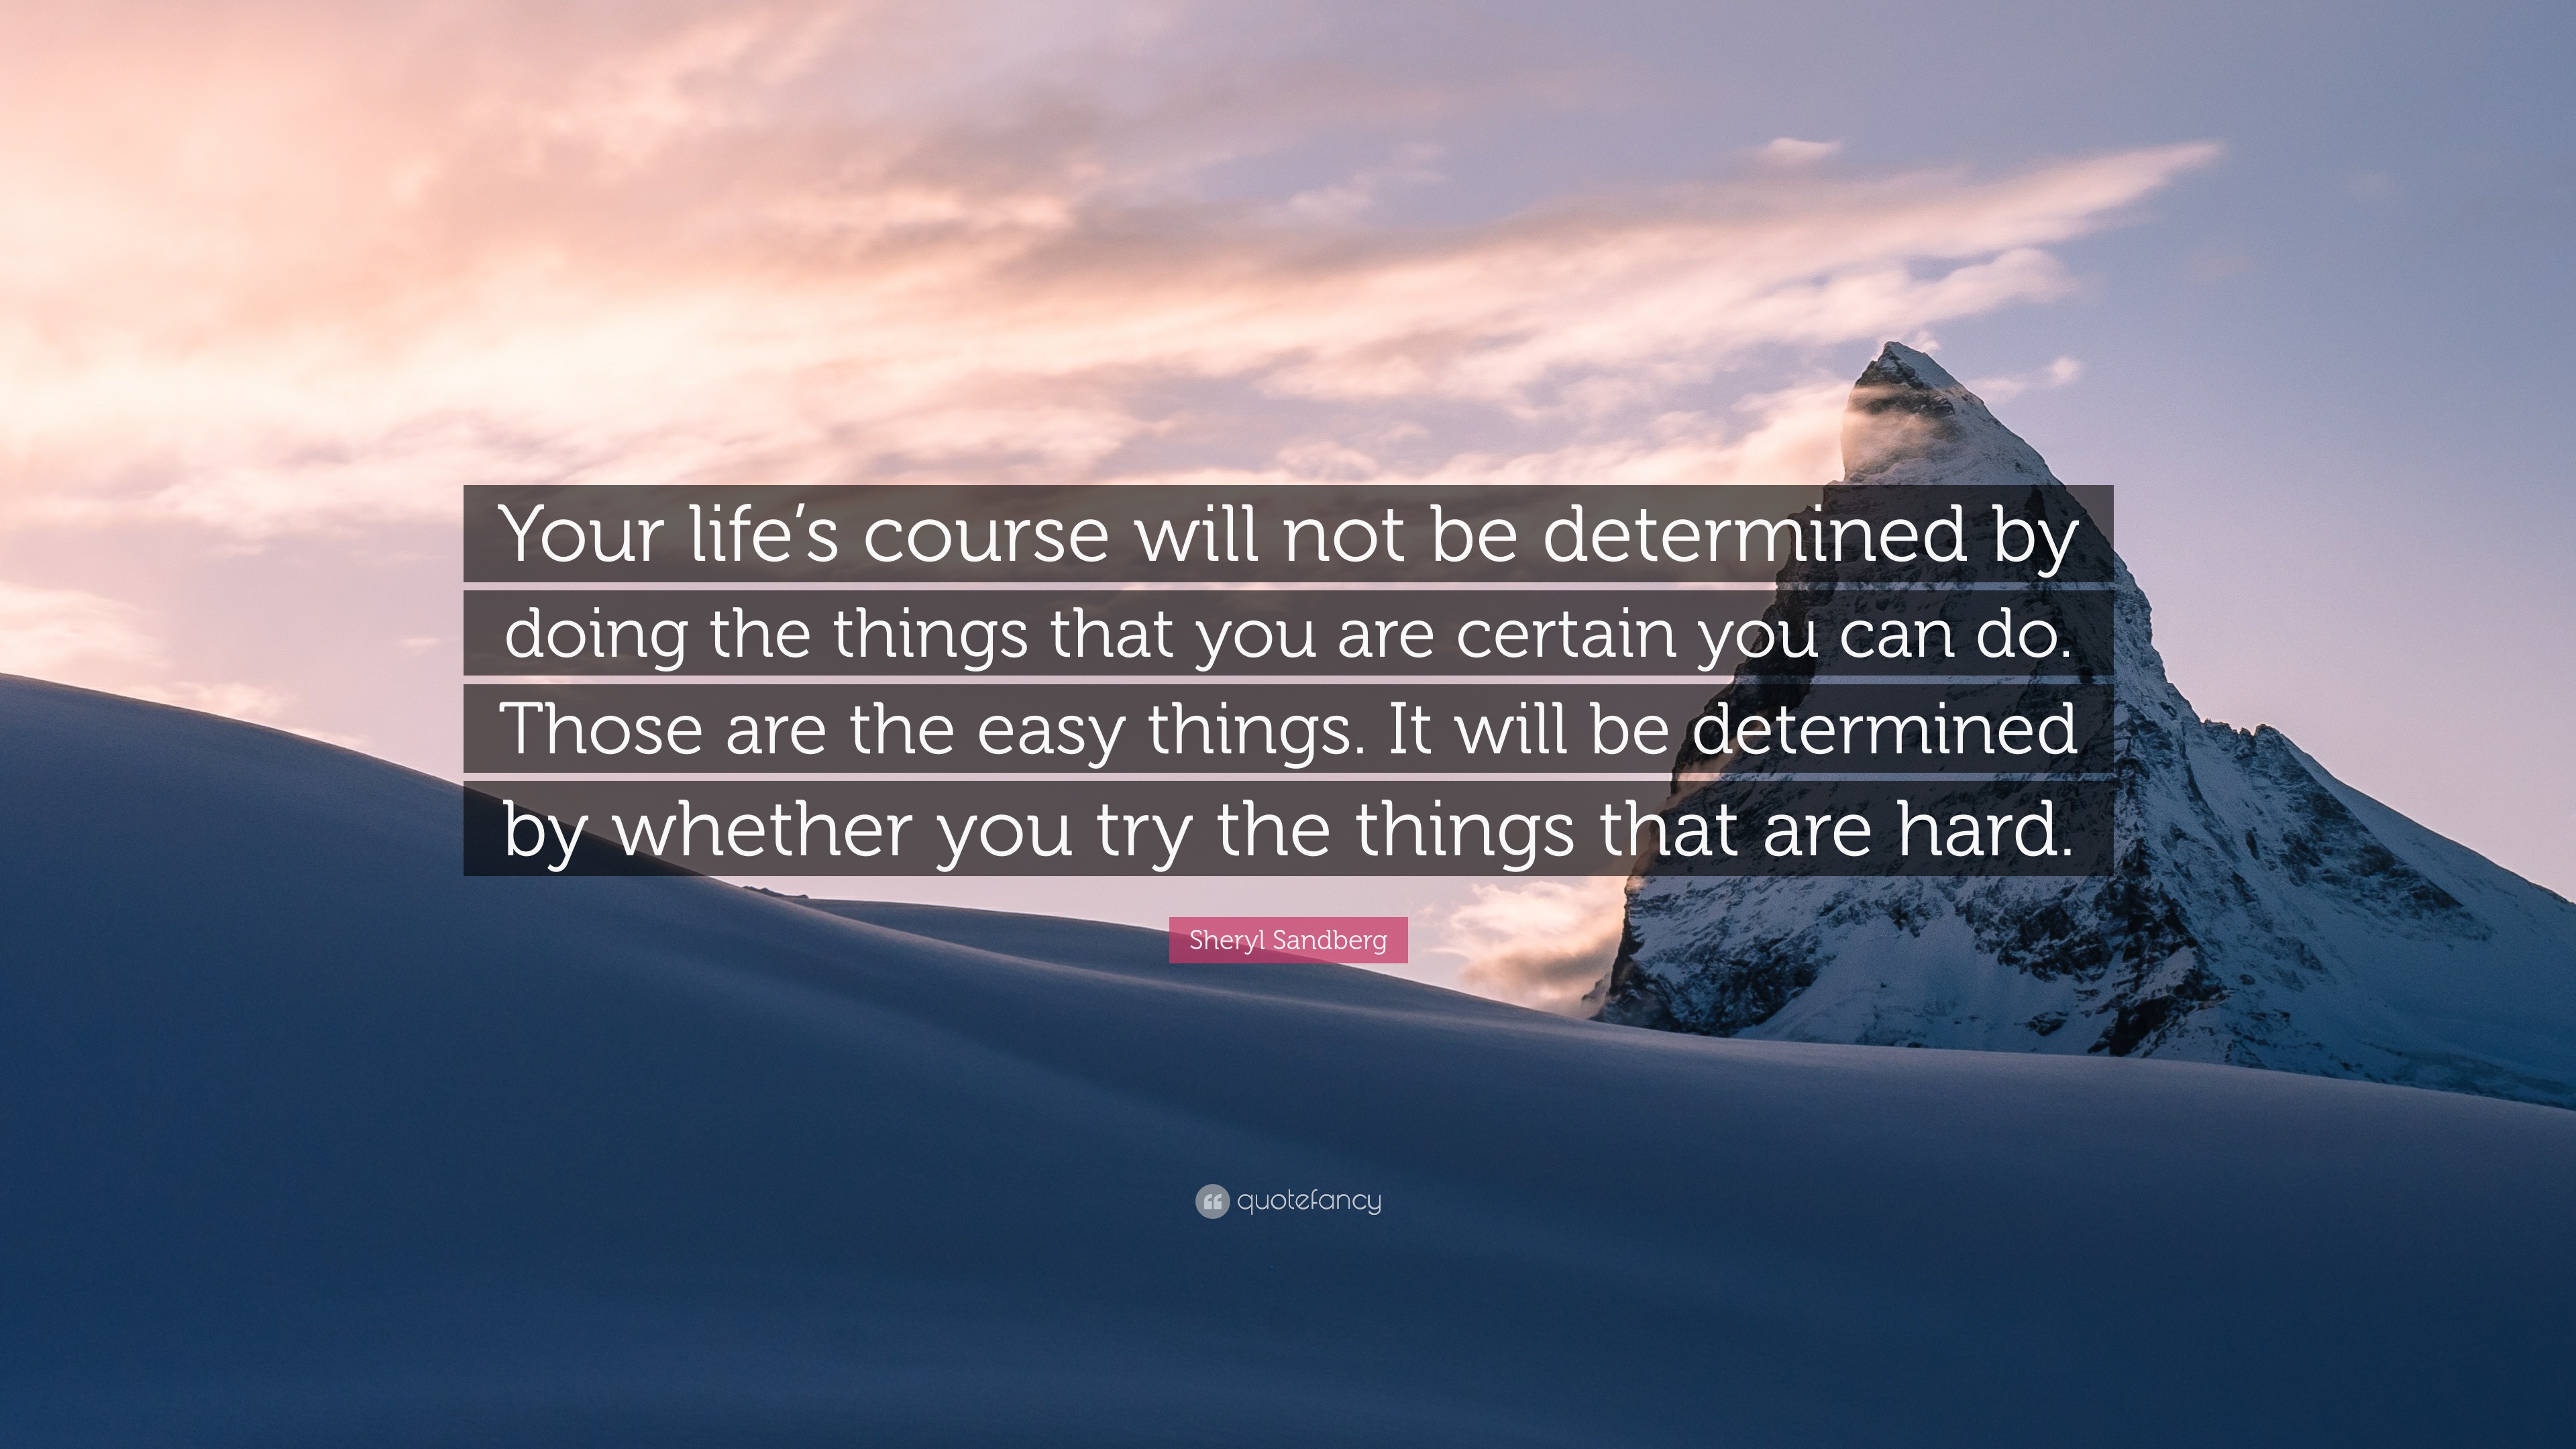 Sheryl Sandberg Quote “Your life s course will not be determined by doing the things